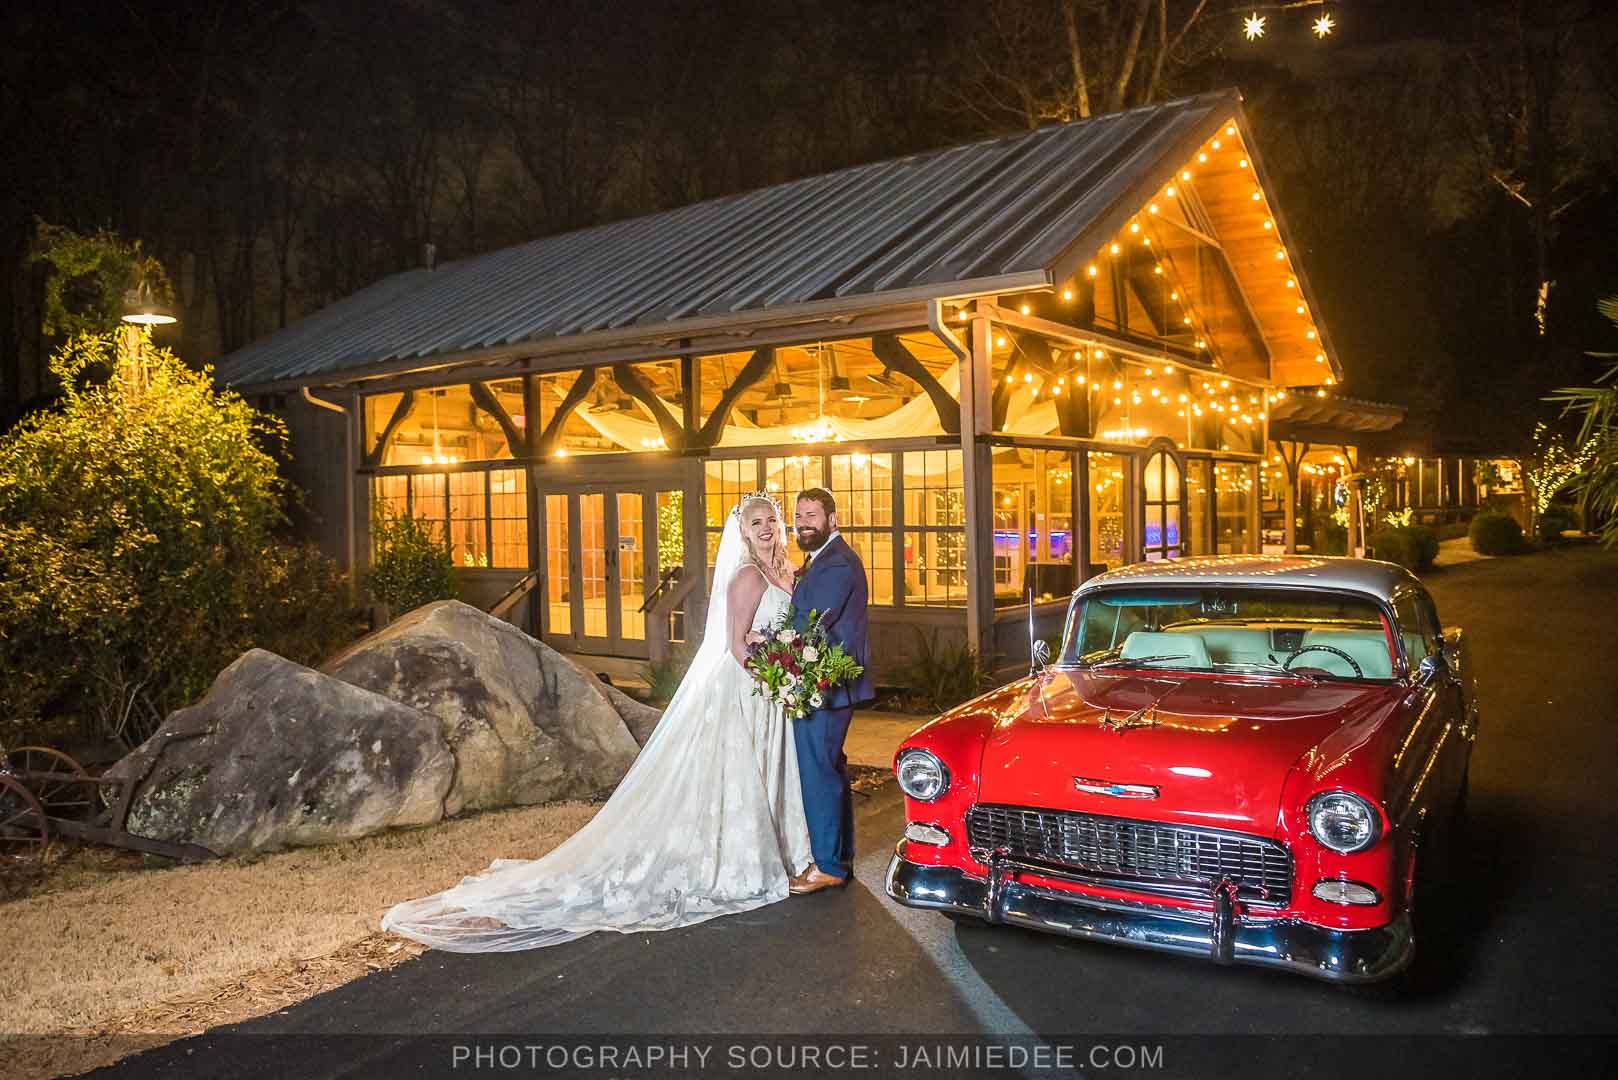 Rocky's Lake Estate Wedding Venue - bride and groom portrait - night time couples portraits in front of lit up venue with classic car